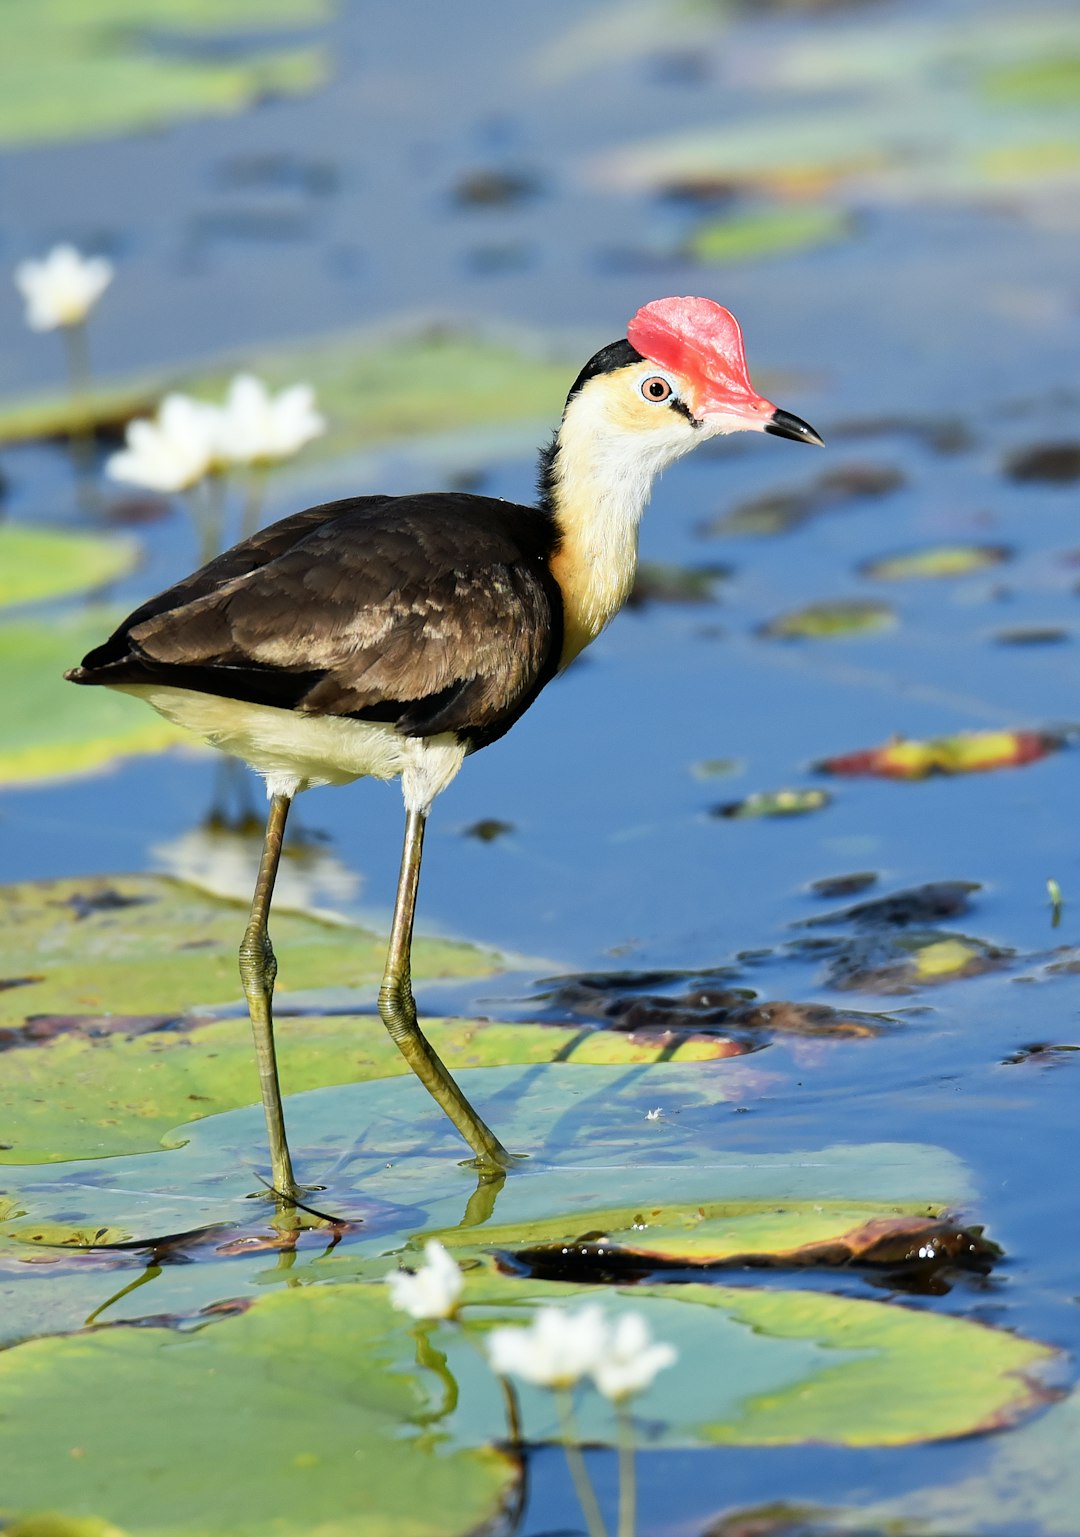 A Comb-crested Jacana posing at the Cattana wetlands, Cairns, Australia.